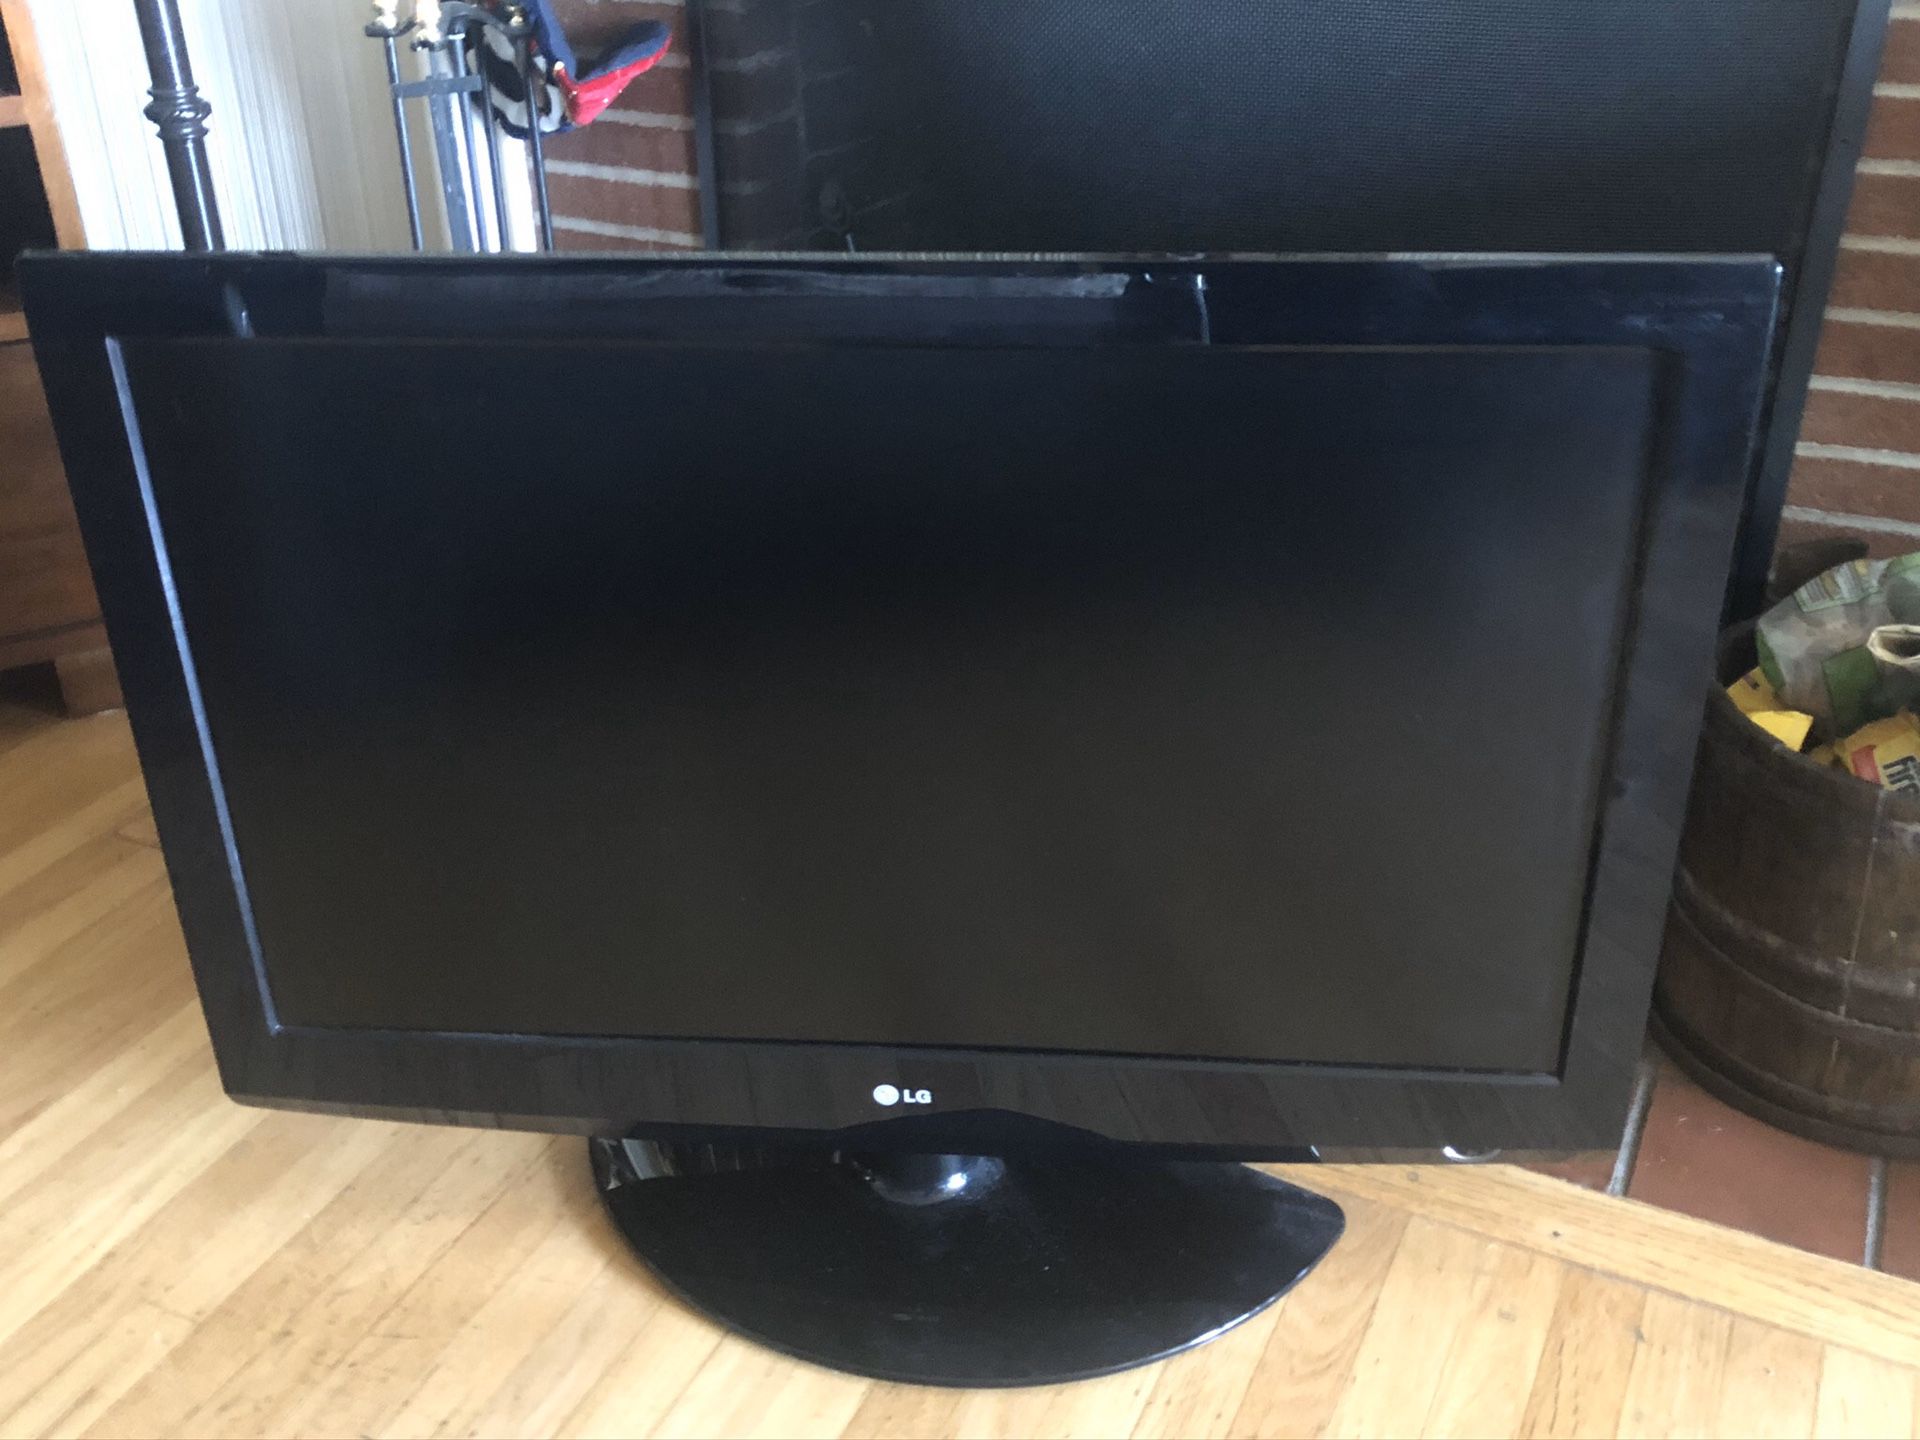 Nice 37” - 37 inch - LG flat screen tv - with remote - HDMI inputs. Works great.